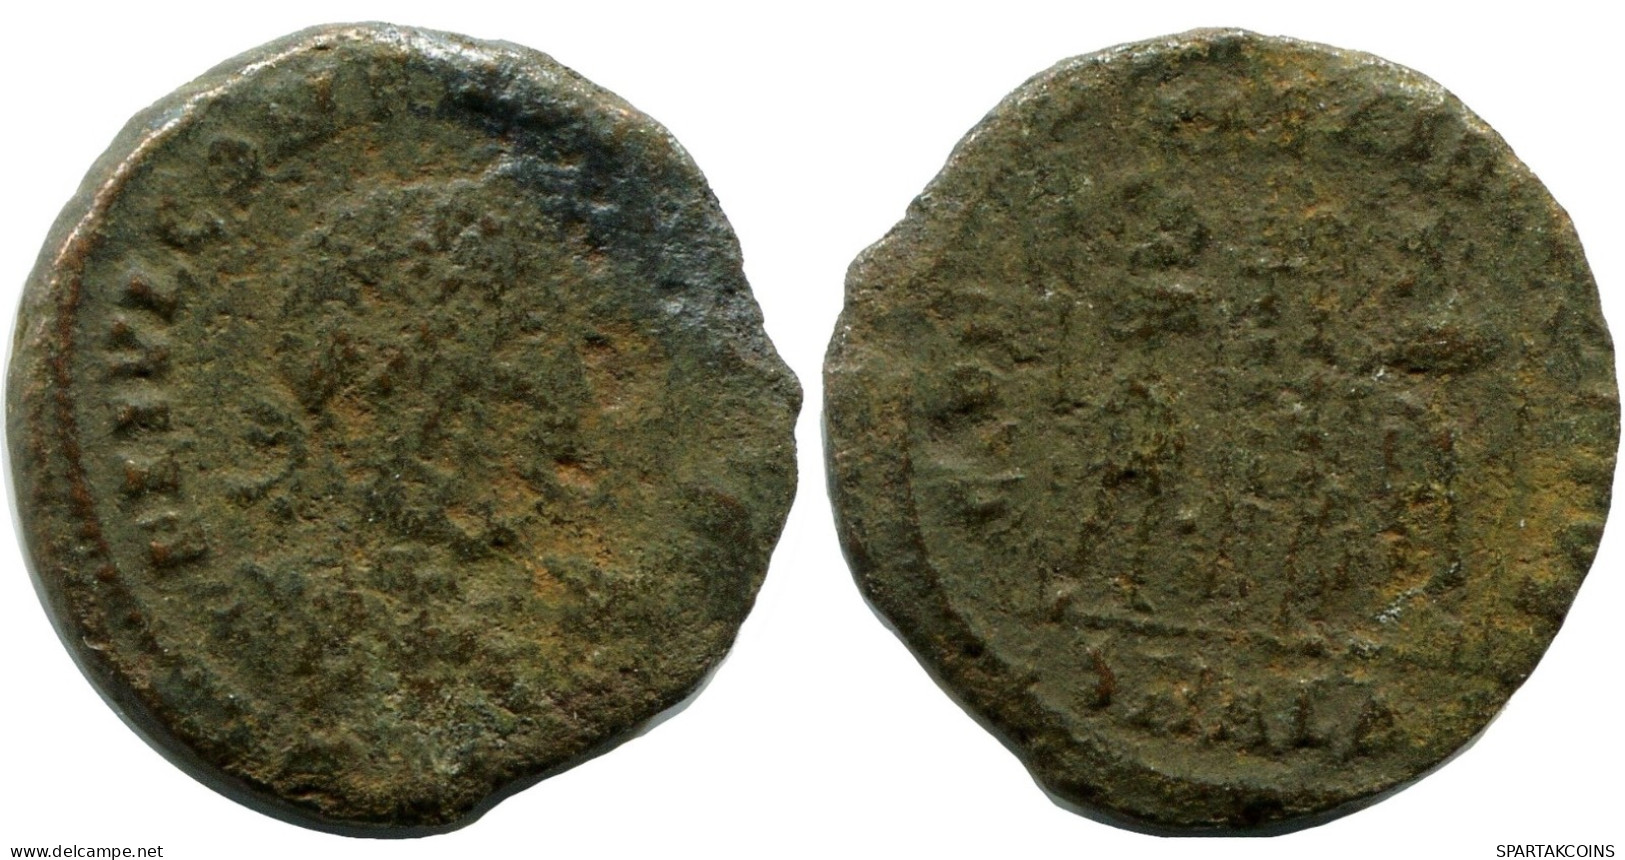 CONSTANS MINTED IN ALEKSANDRIA FOUND IN IHNASYAH HOARD EGYPT #ANC11458.14.F.A - The Christian Empire (307 AD Tot 363 AD)